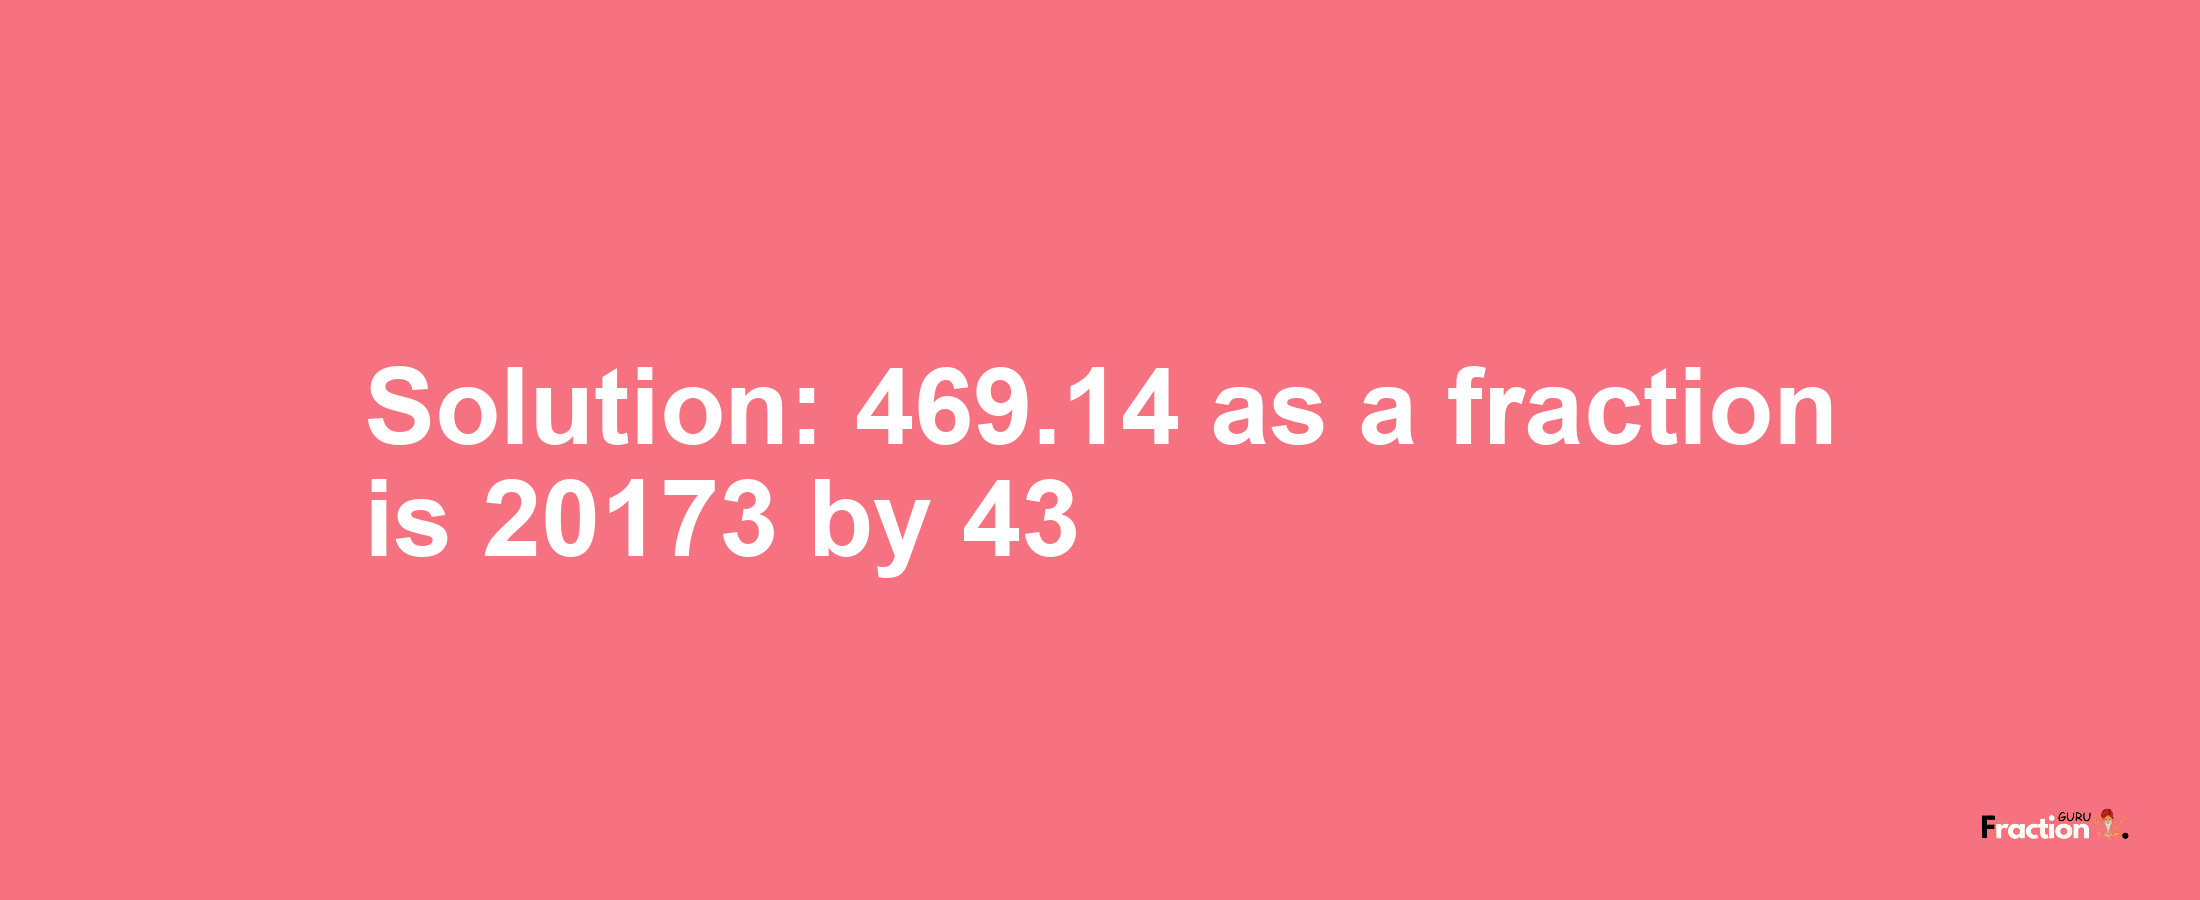 Solution:469.14 as a fraction is 20173/43